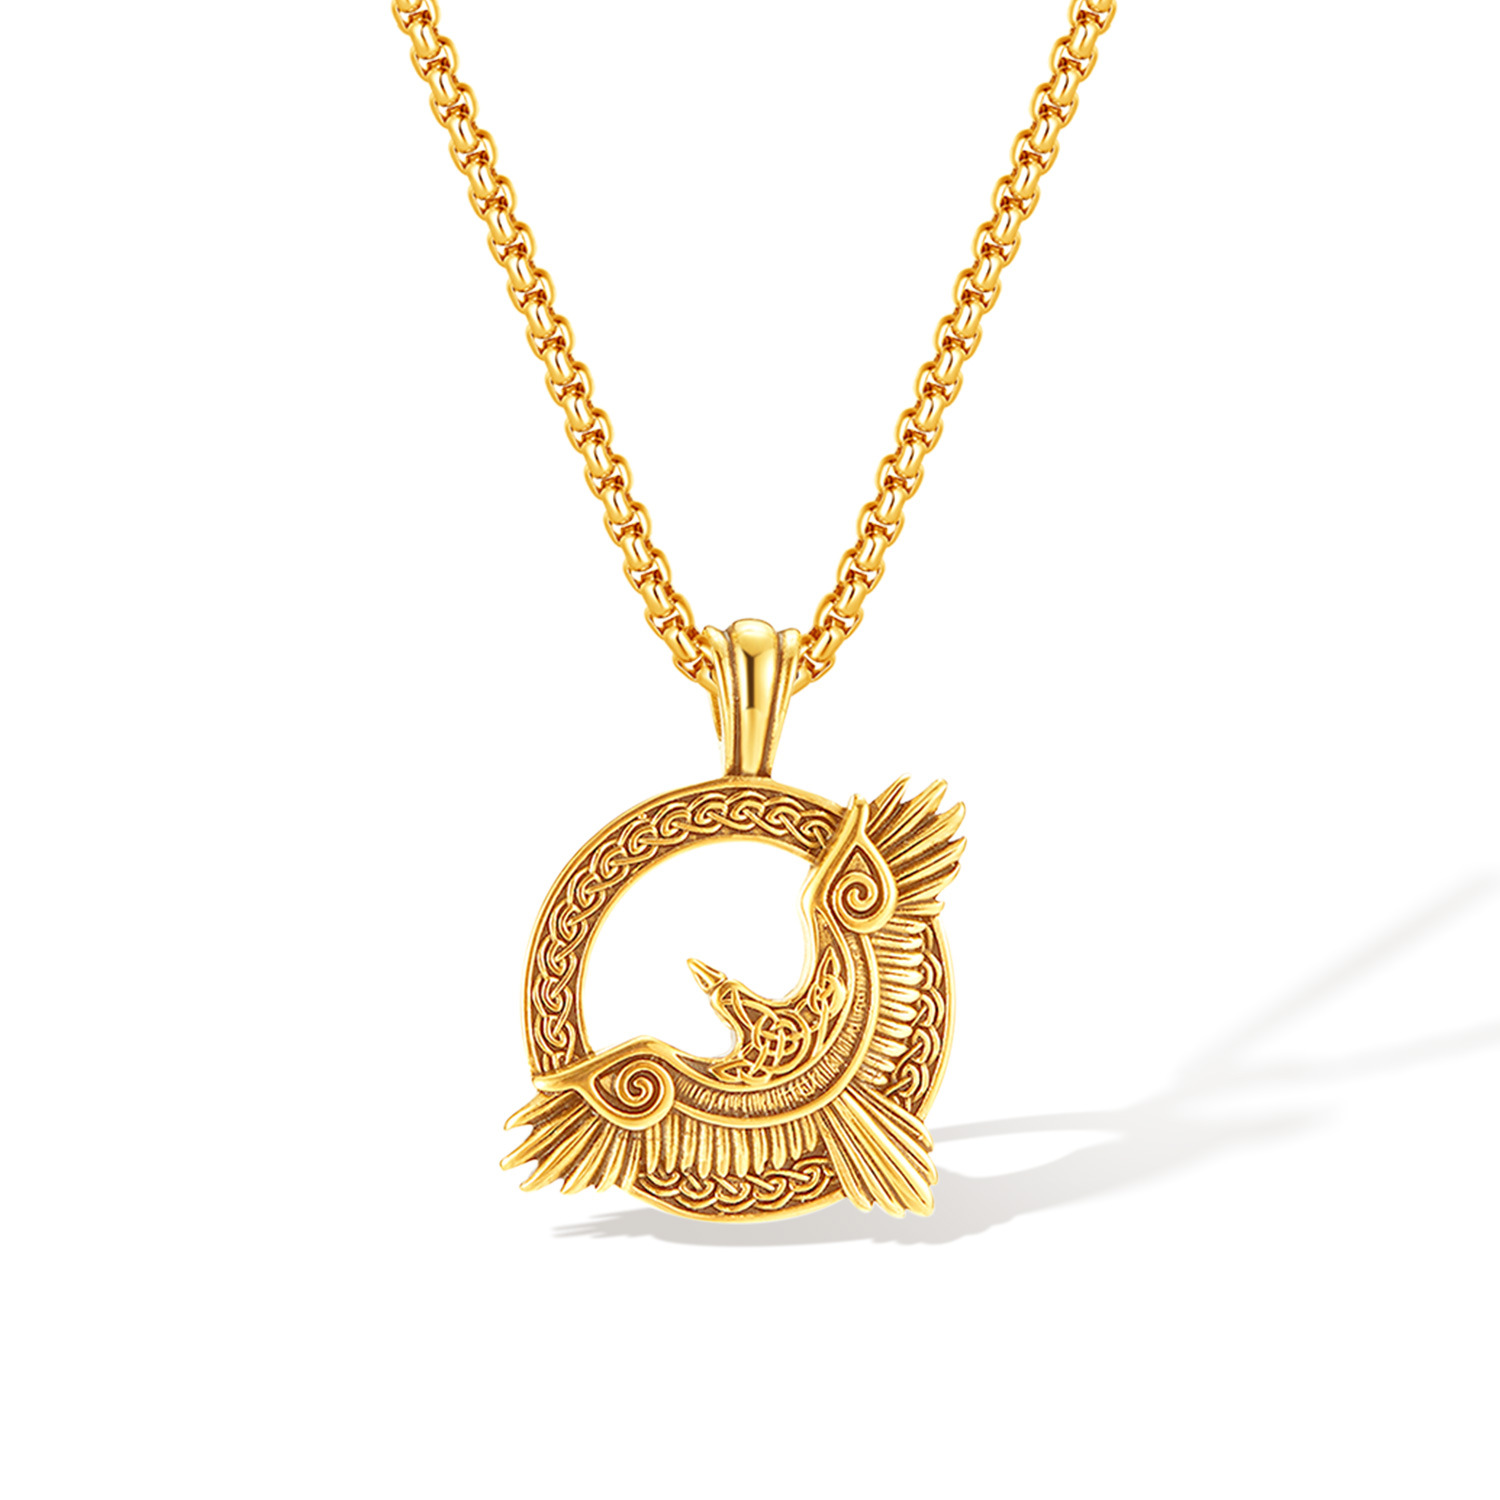 Gold pendant with chain 4x70cm